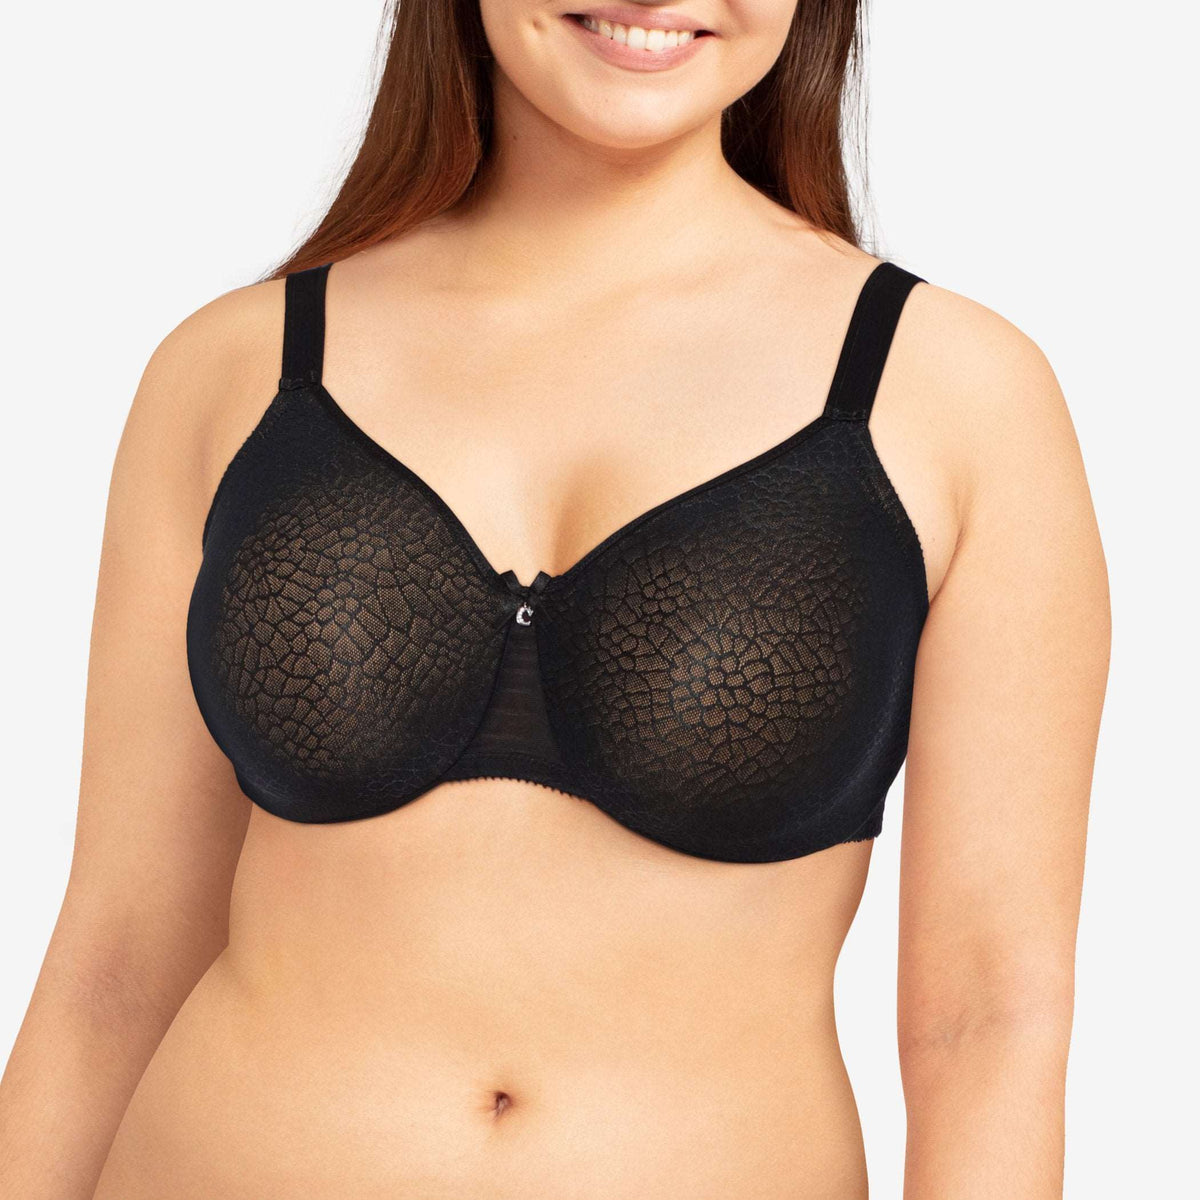 Chantelle Every Curve Full Cup Bra - Belle Lingerie